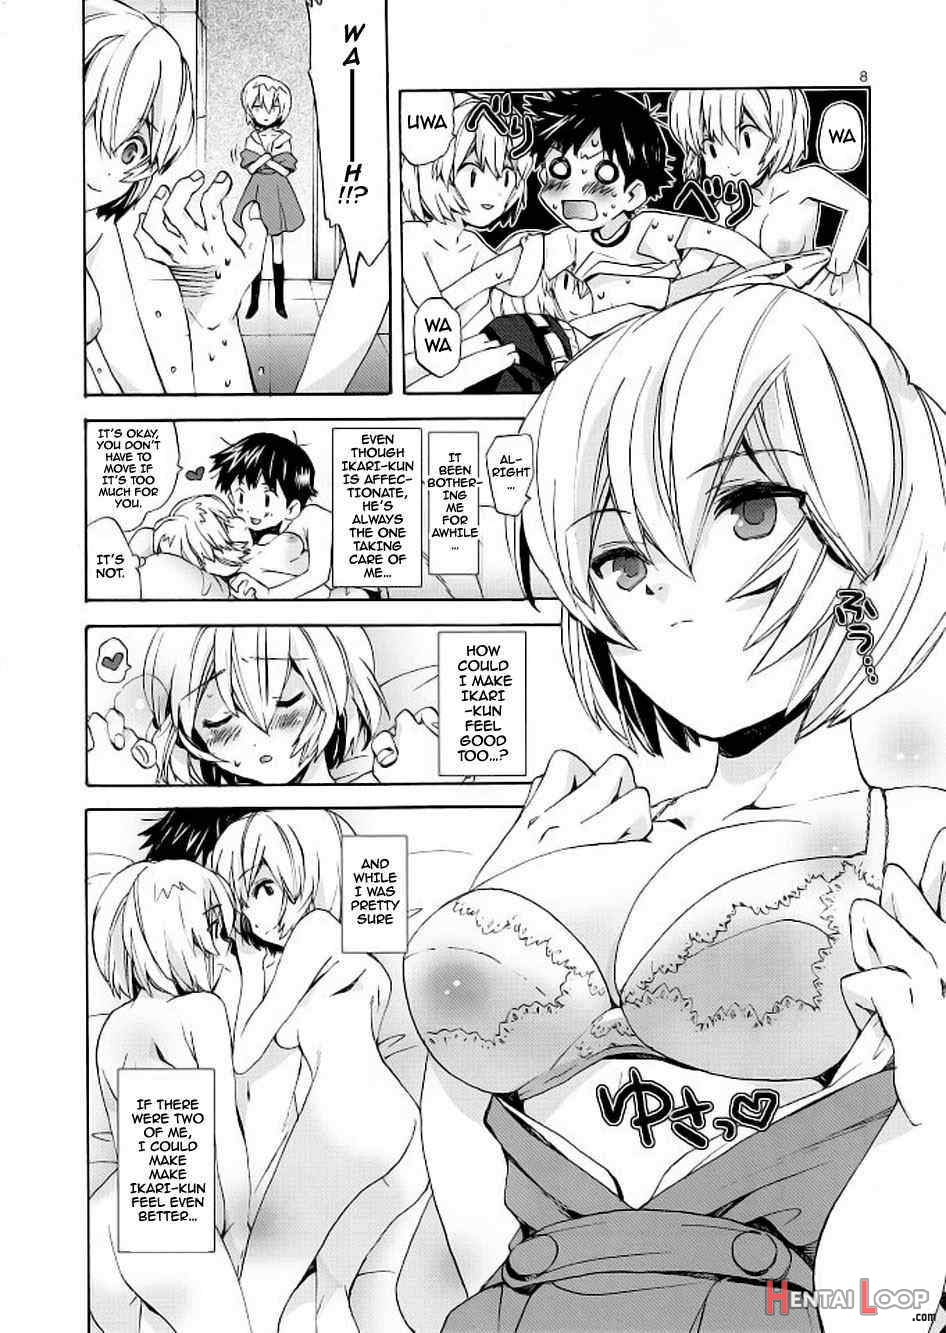 Ayanami House he Youkoso page 5